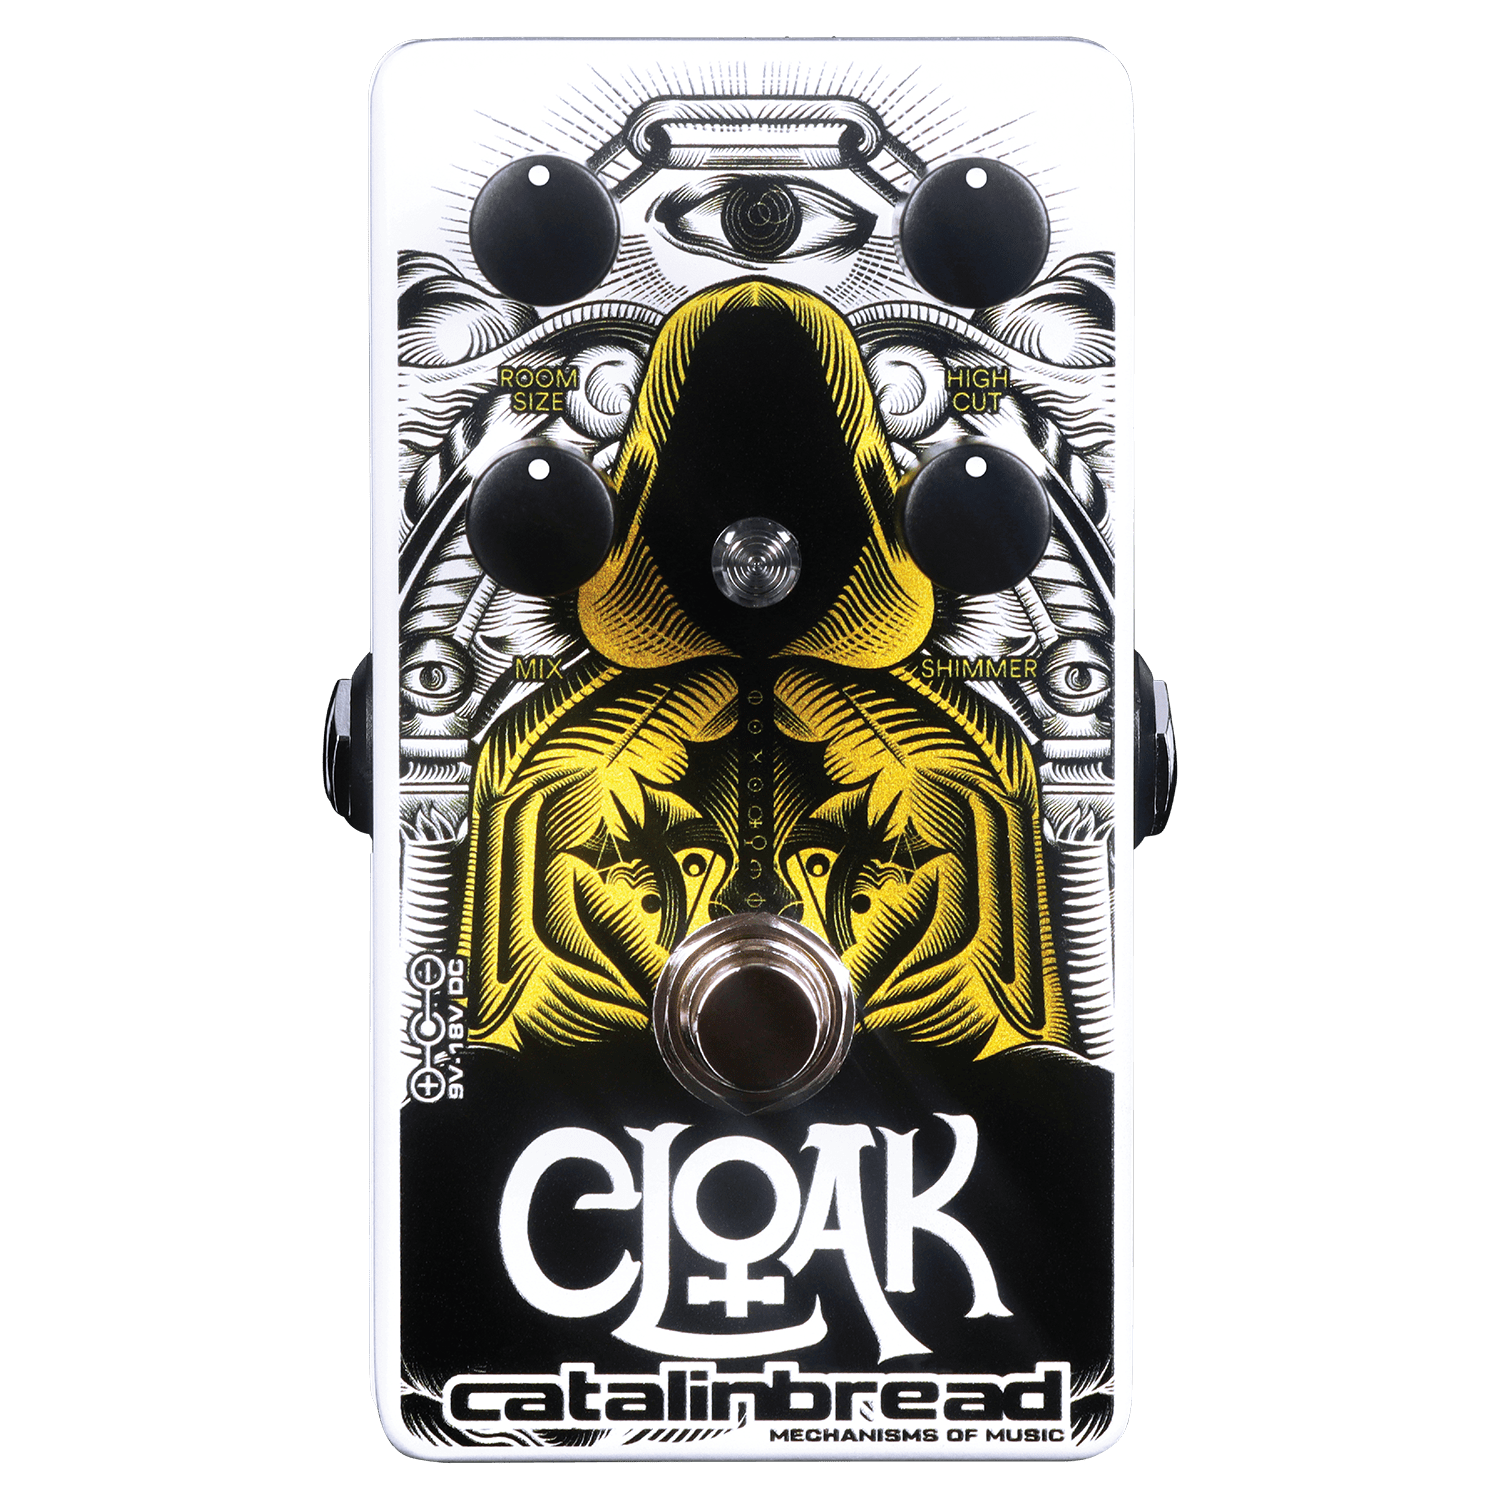 Cloak Reverb and Shimmer (B-STOCK)